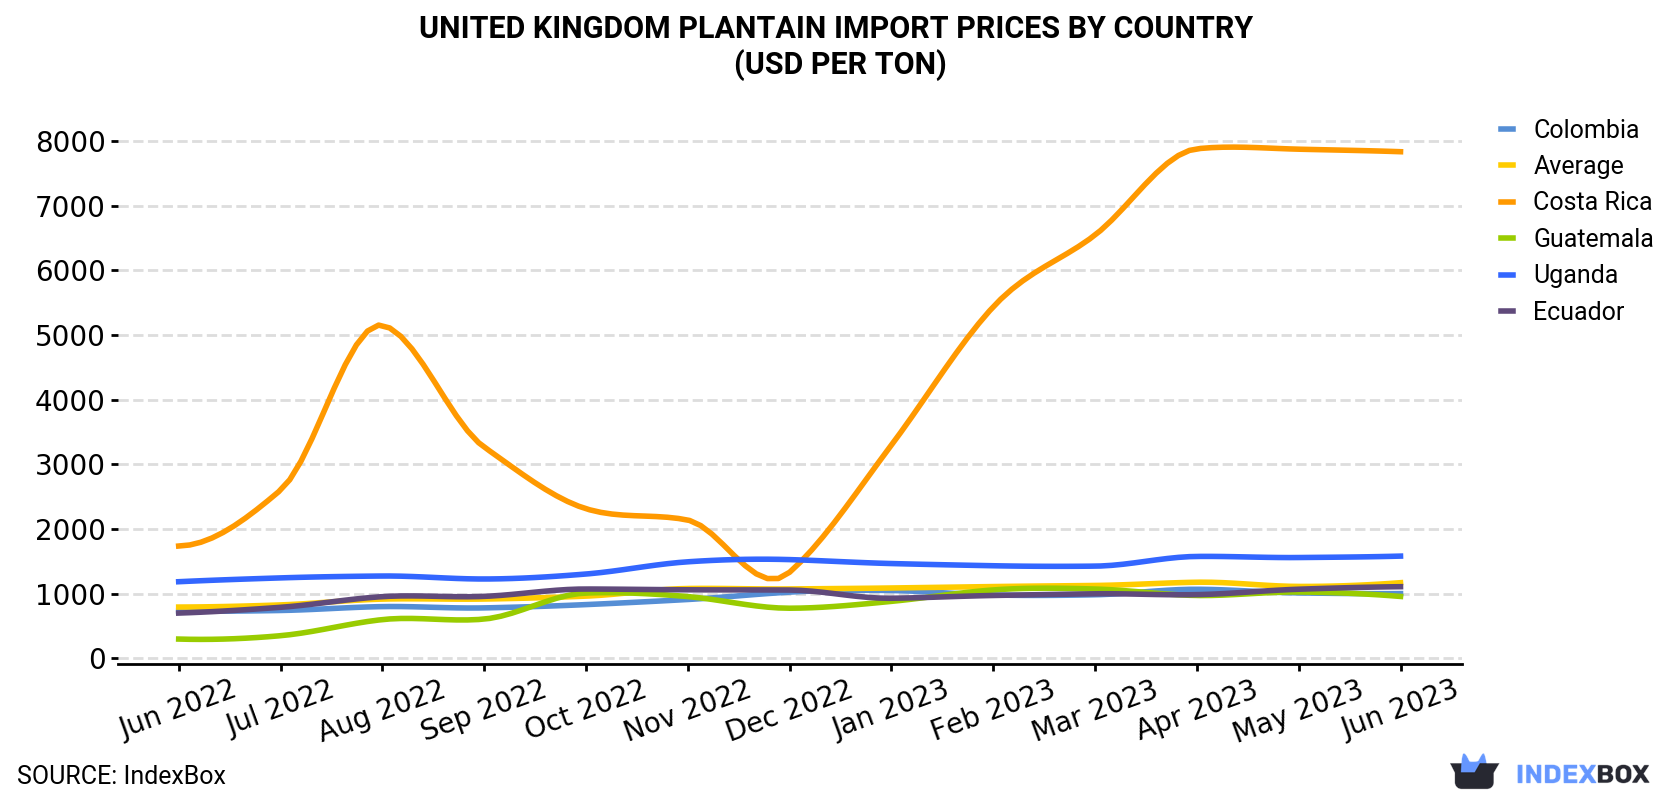 United Kingdom Plantain Import Prices By Country (USD Per Ton)